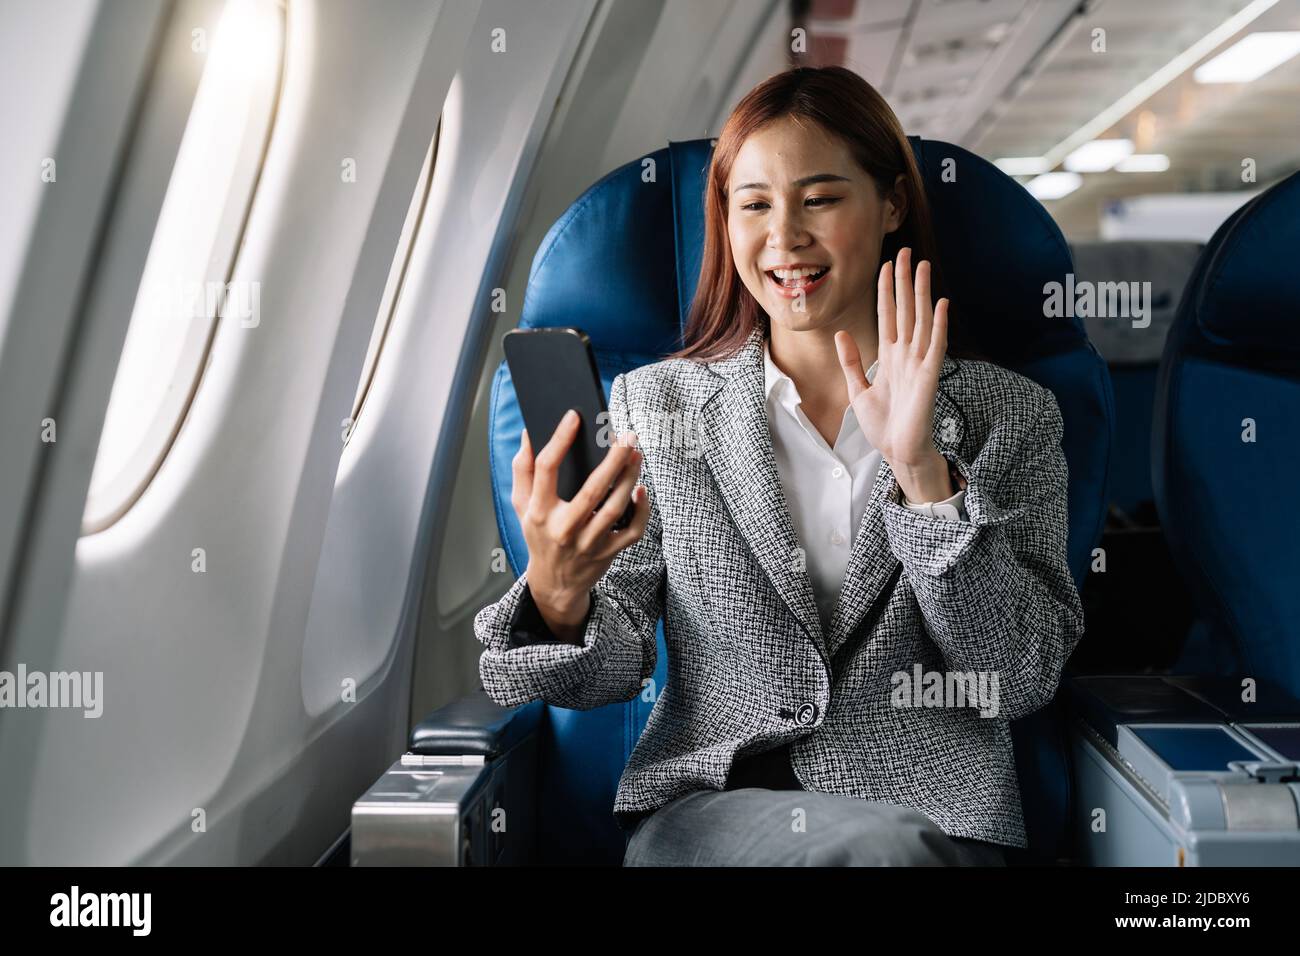 Smiling young asian businesswoman waving hand during video call on smartphone in plane Stock Photo